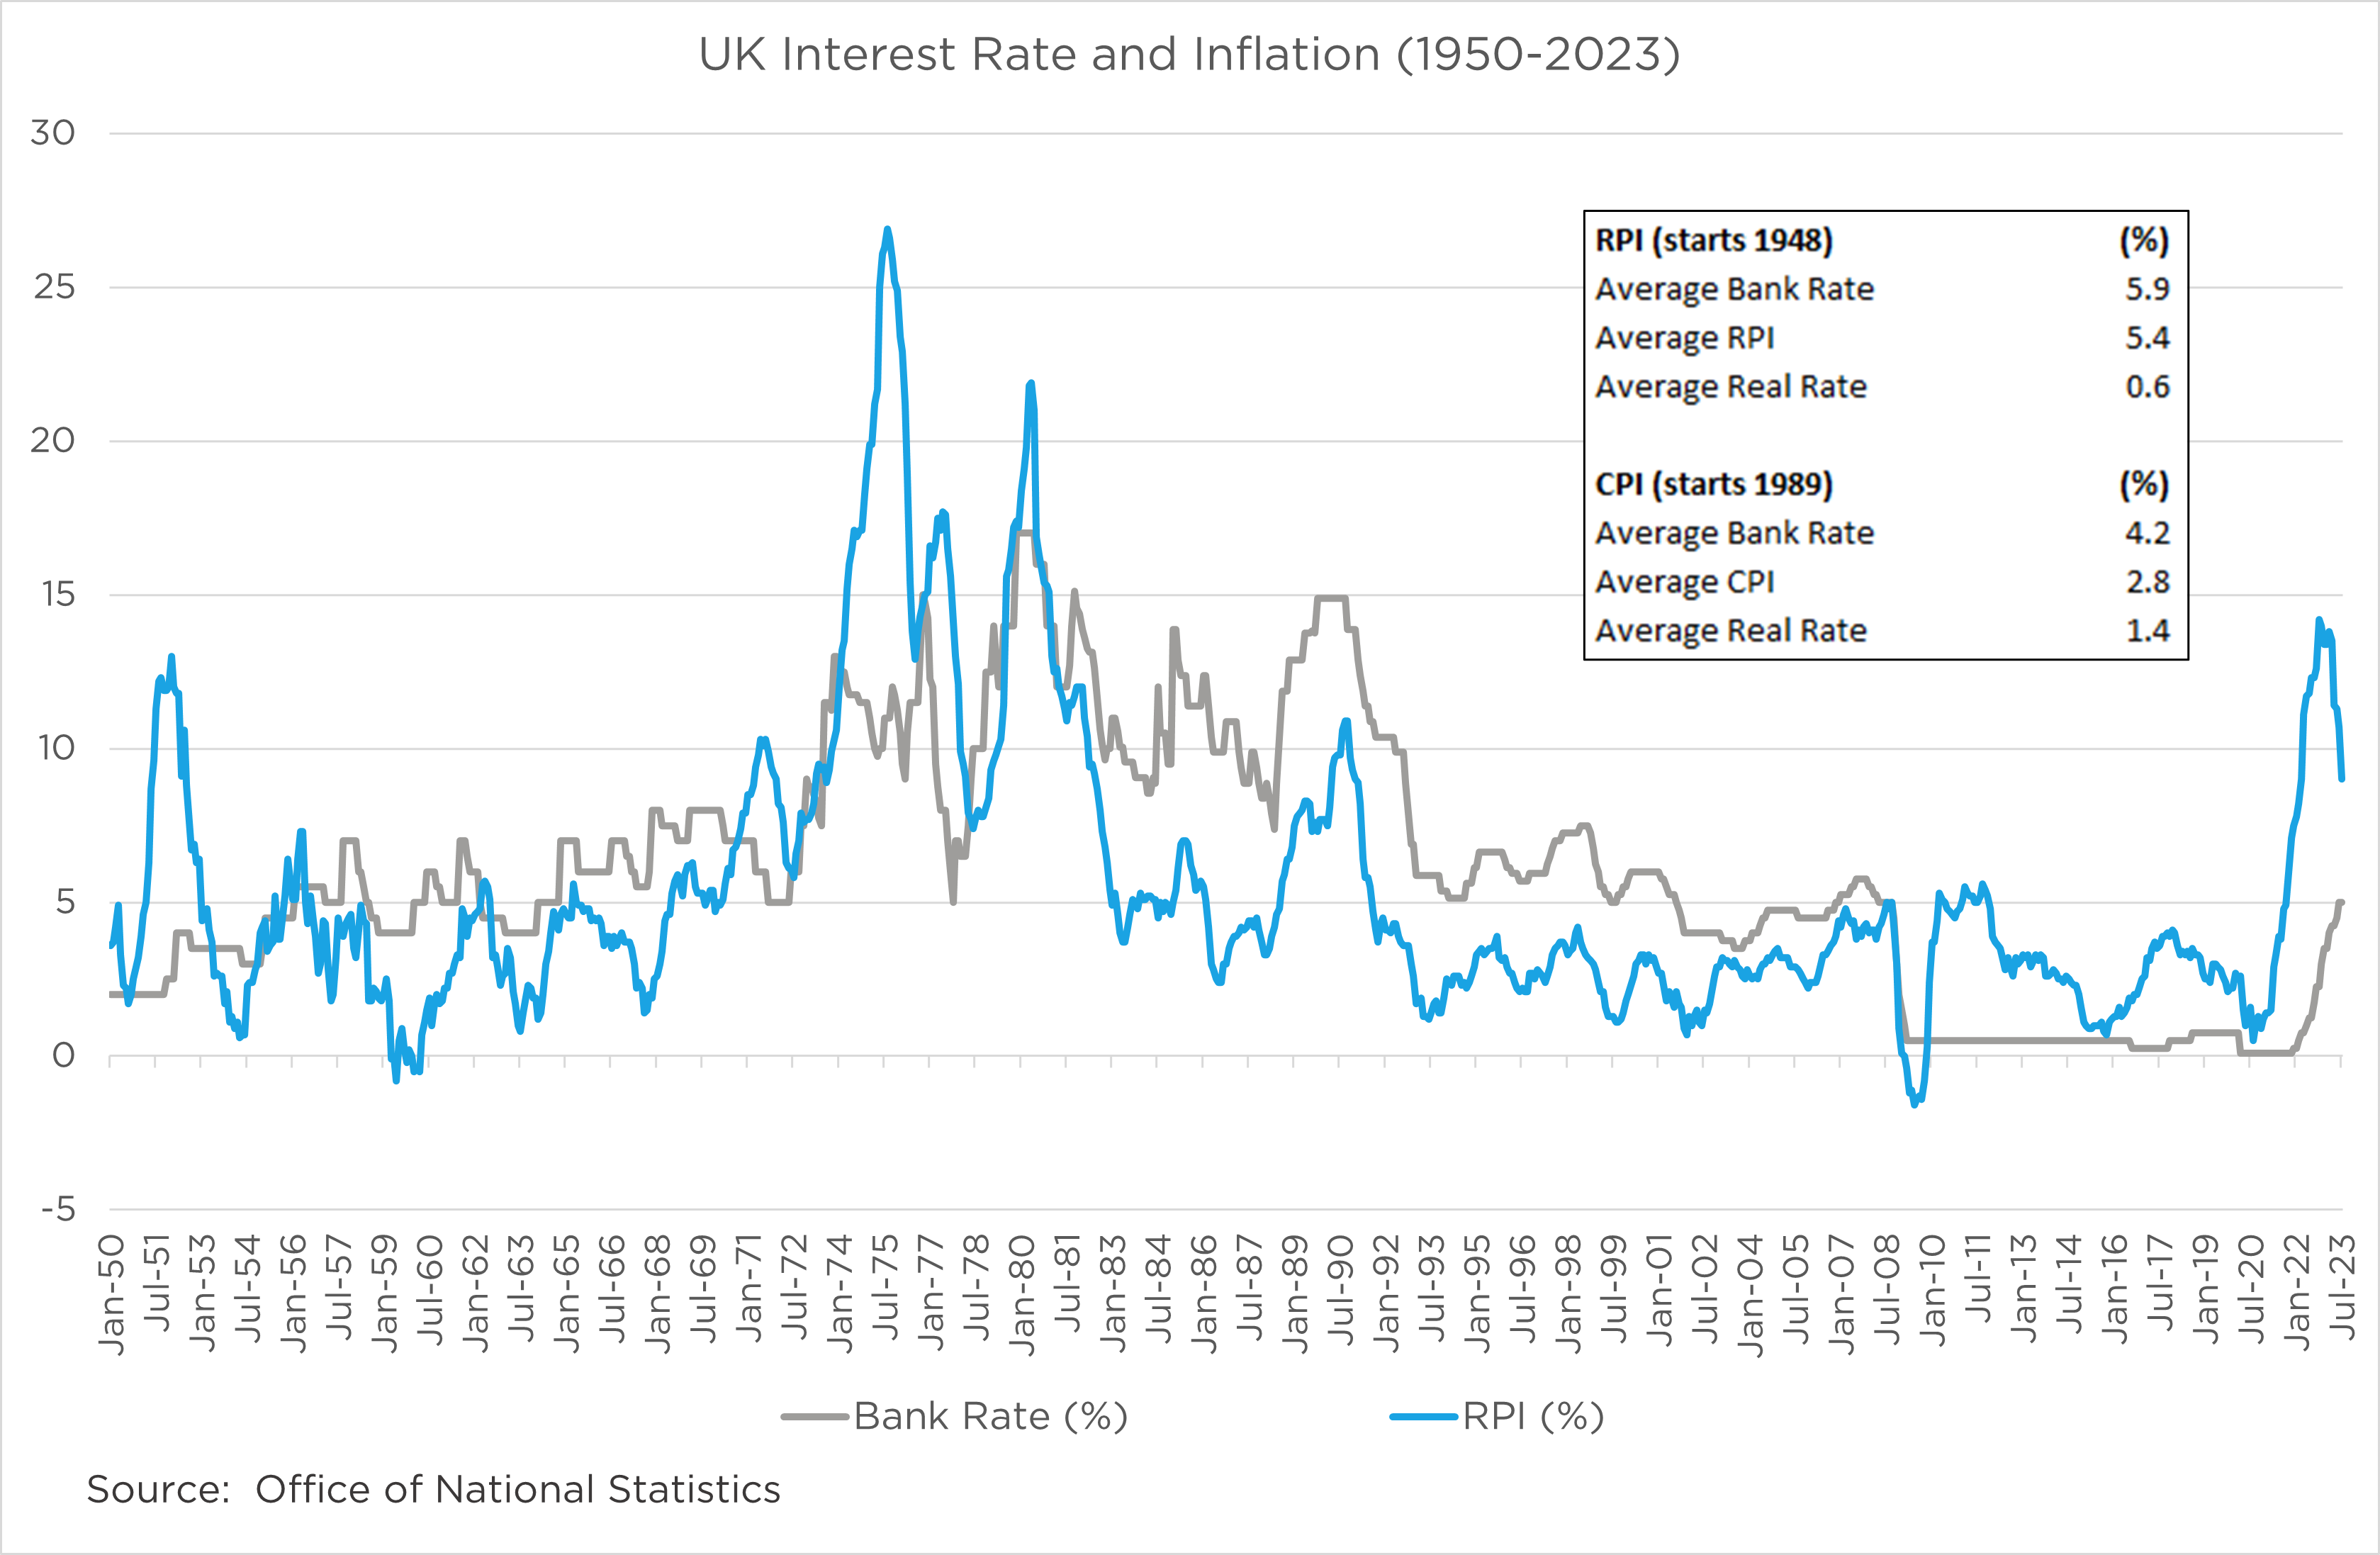 Chart shows UK Interest Rates and Inflation between 1950 and 2023 